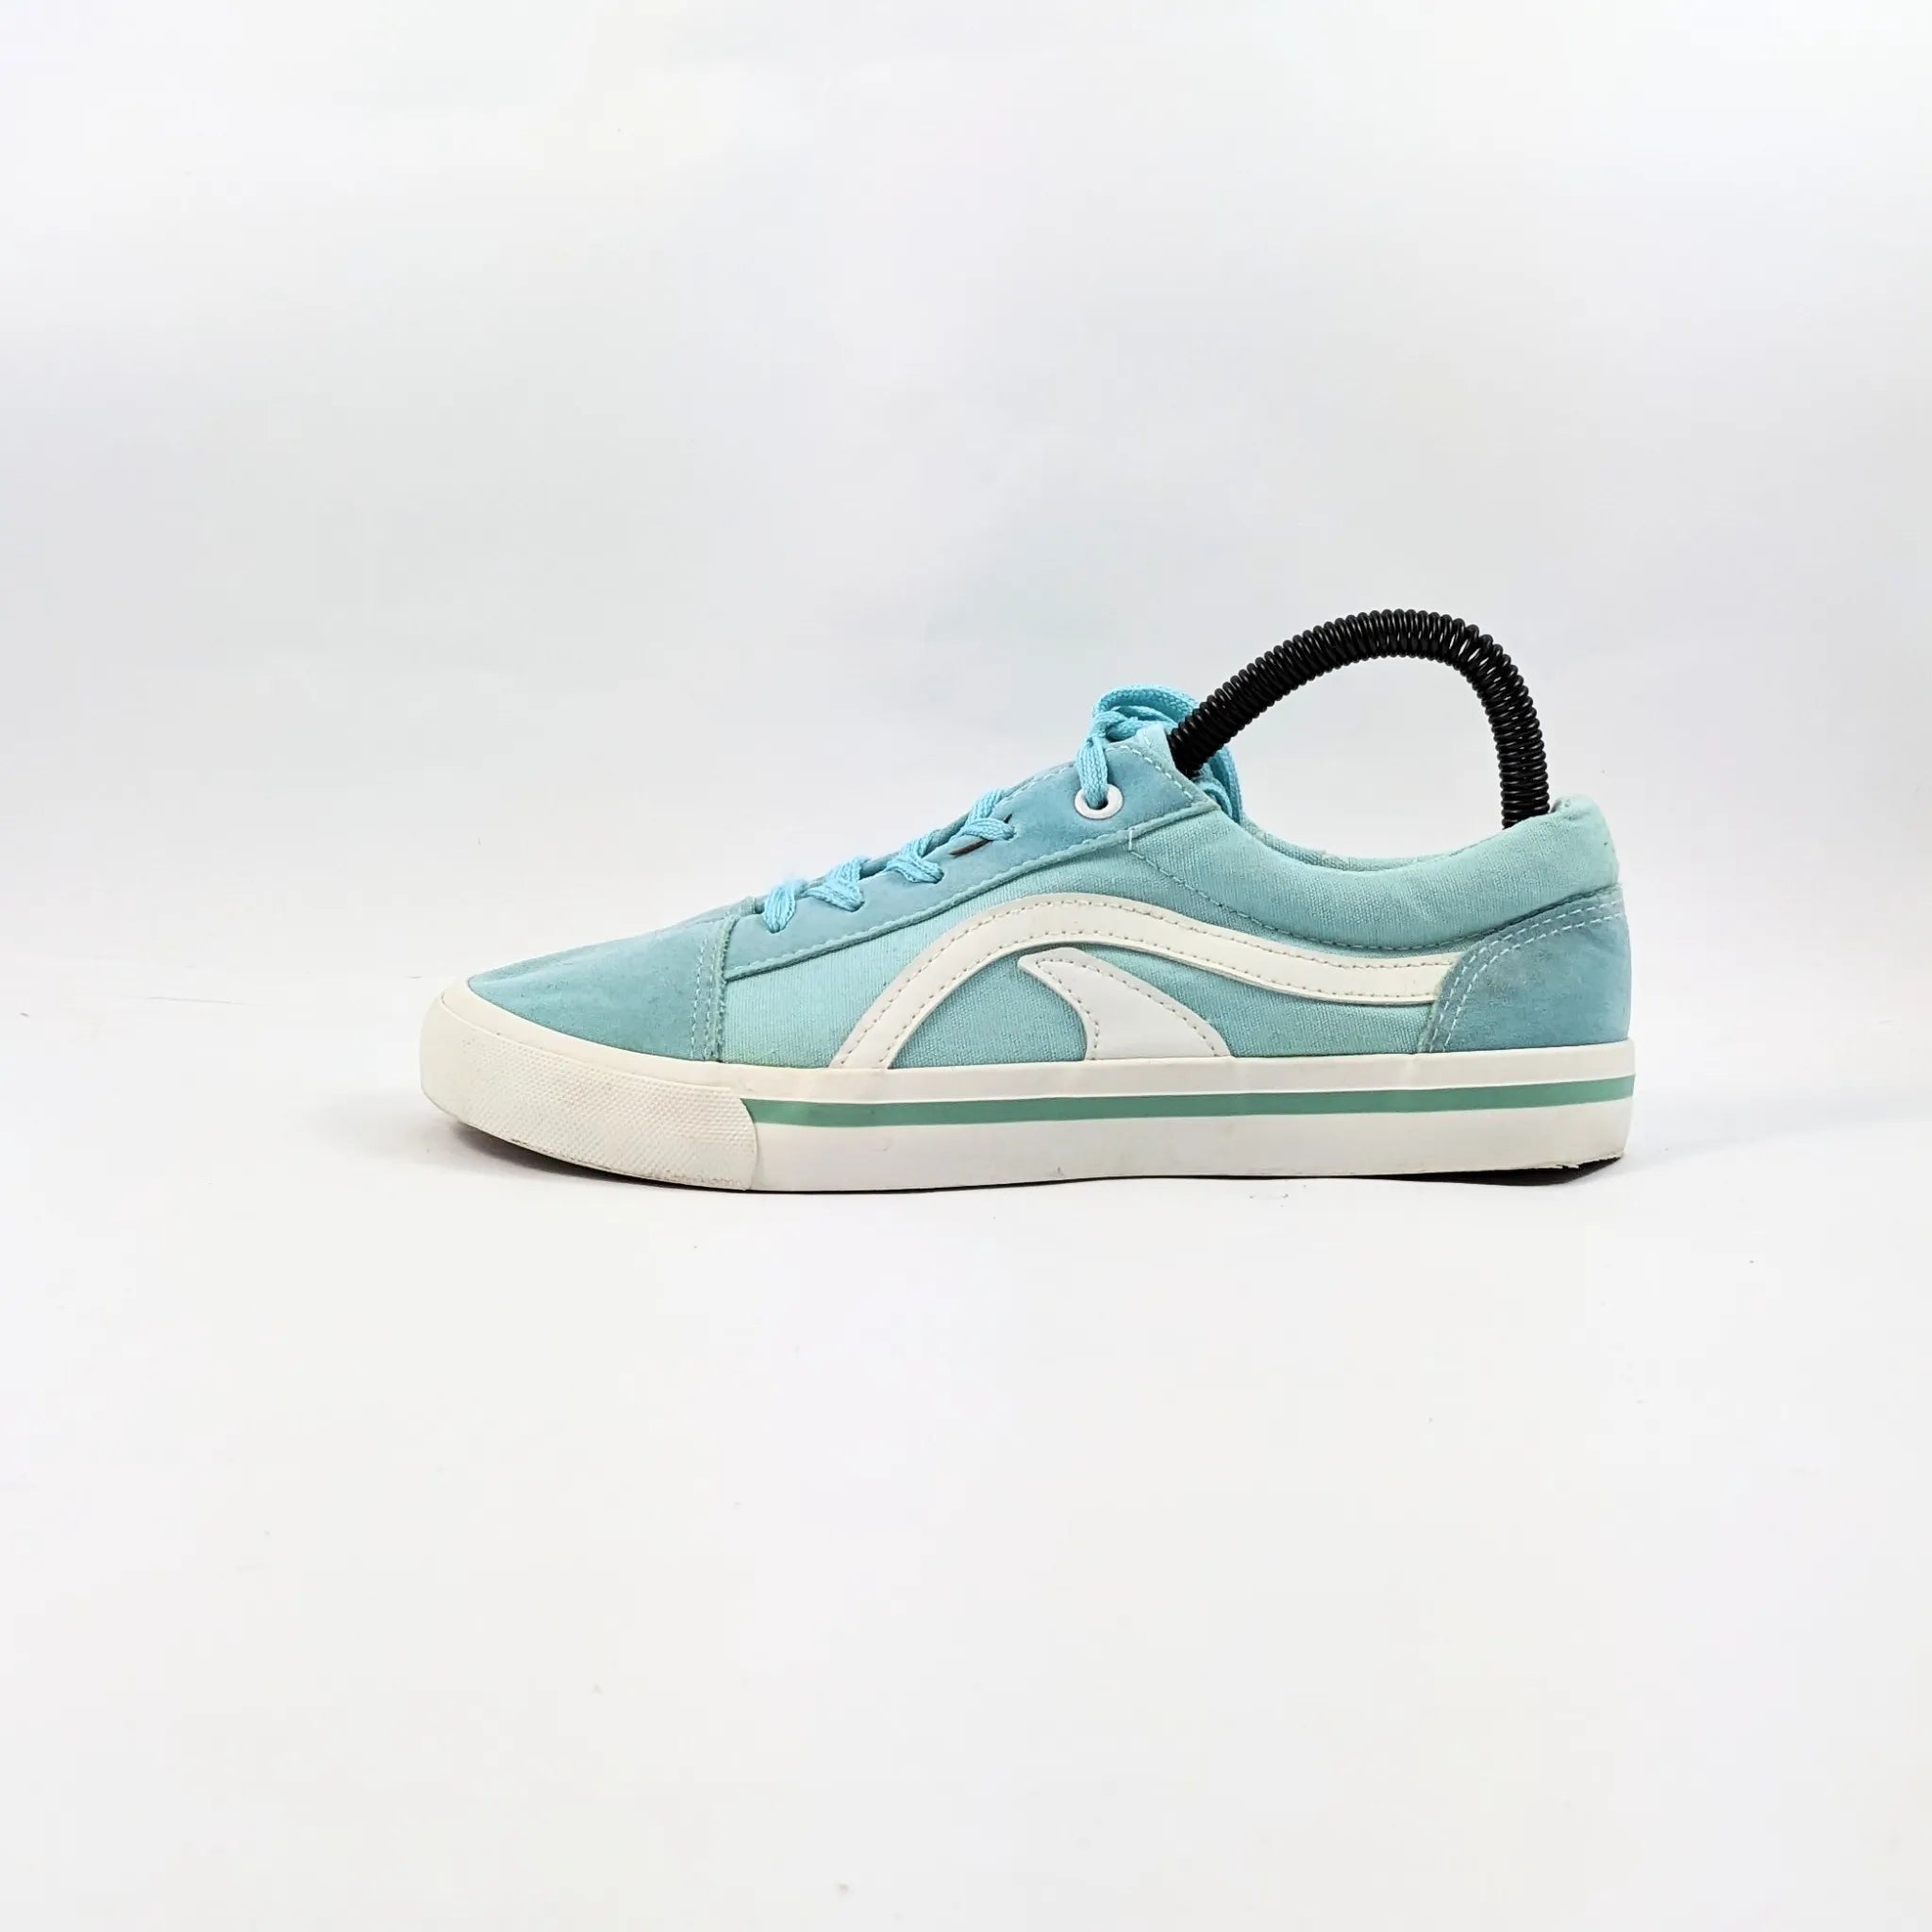 Alive Blue Sneakers